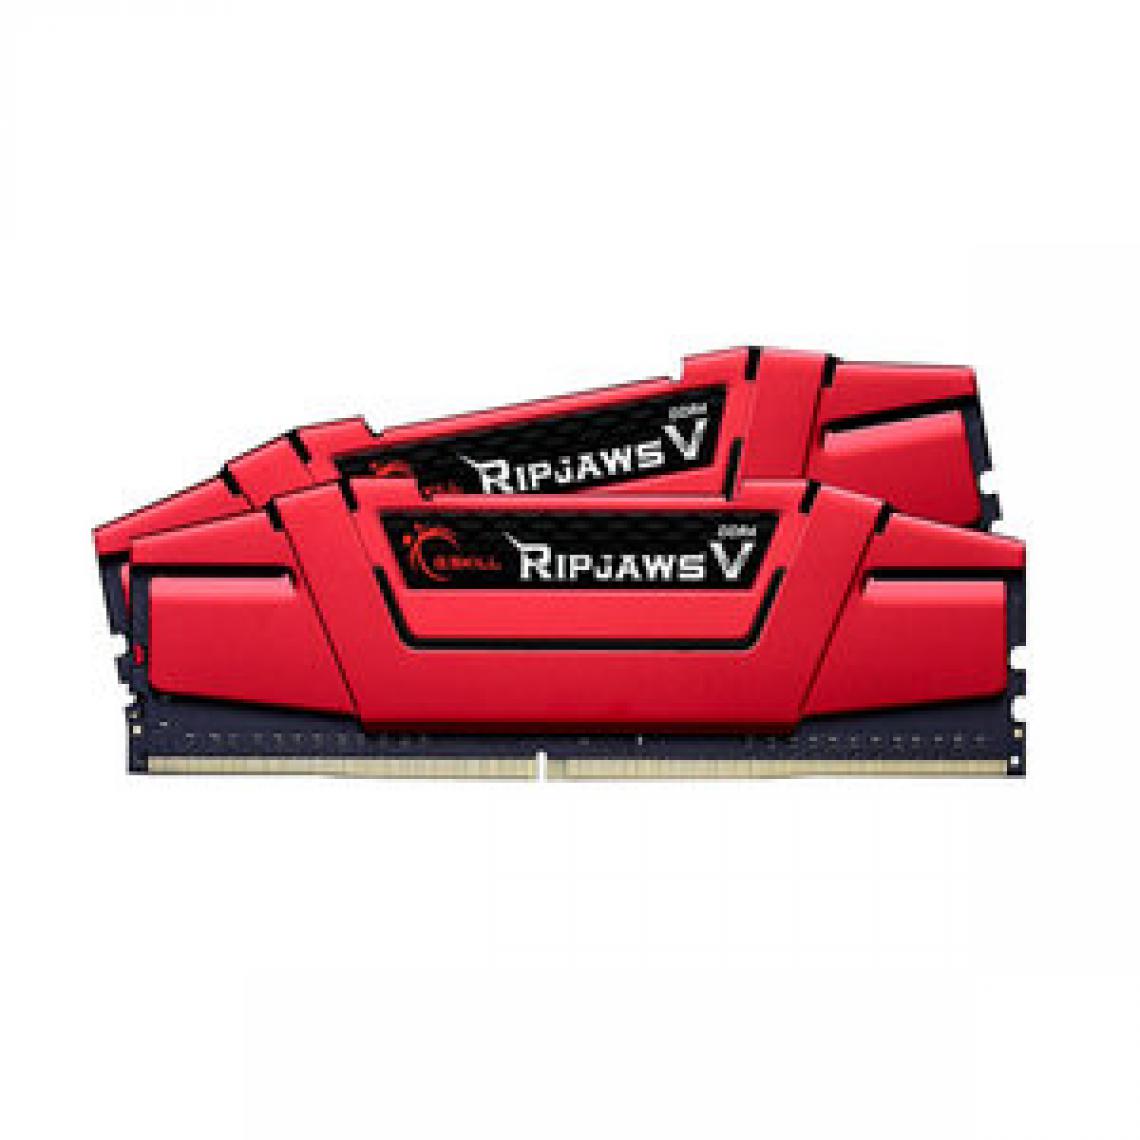 Gskill - RipJaws 5 Series Rouge 8 Go (2x 4 Go) DDR4 2400 MHz CL17 - RAM PC Fixe